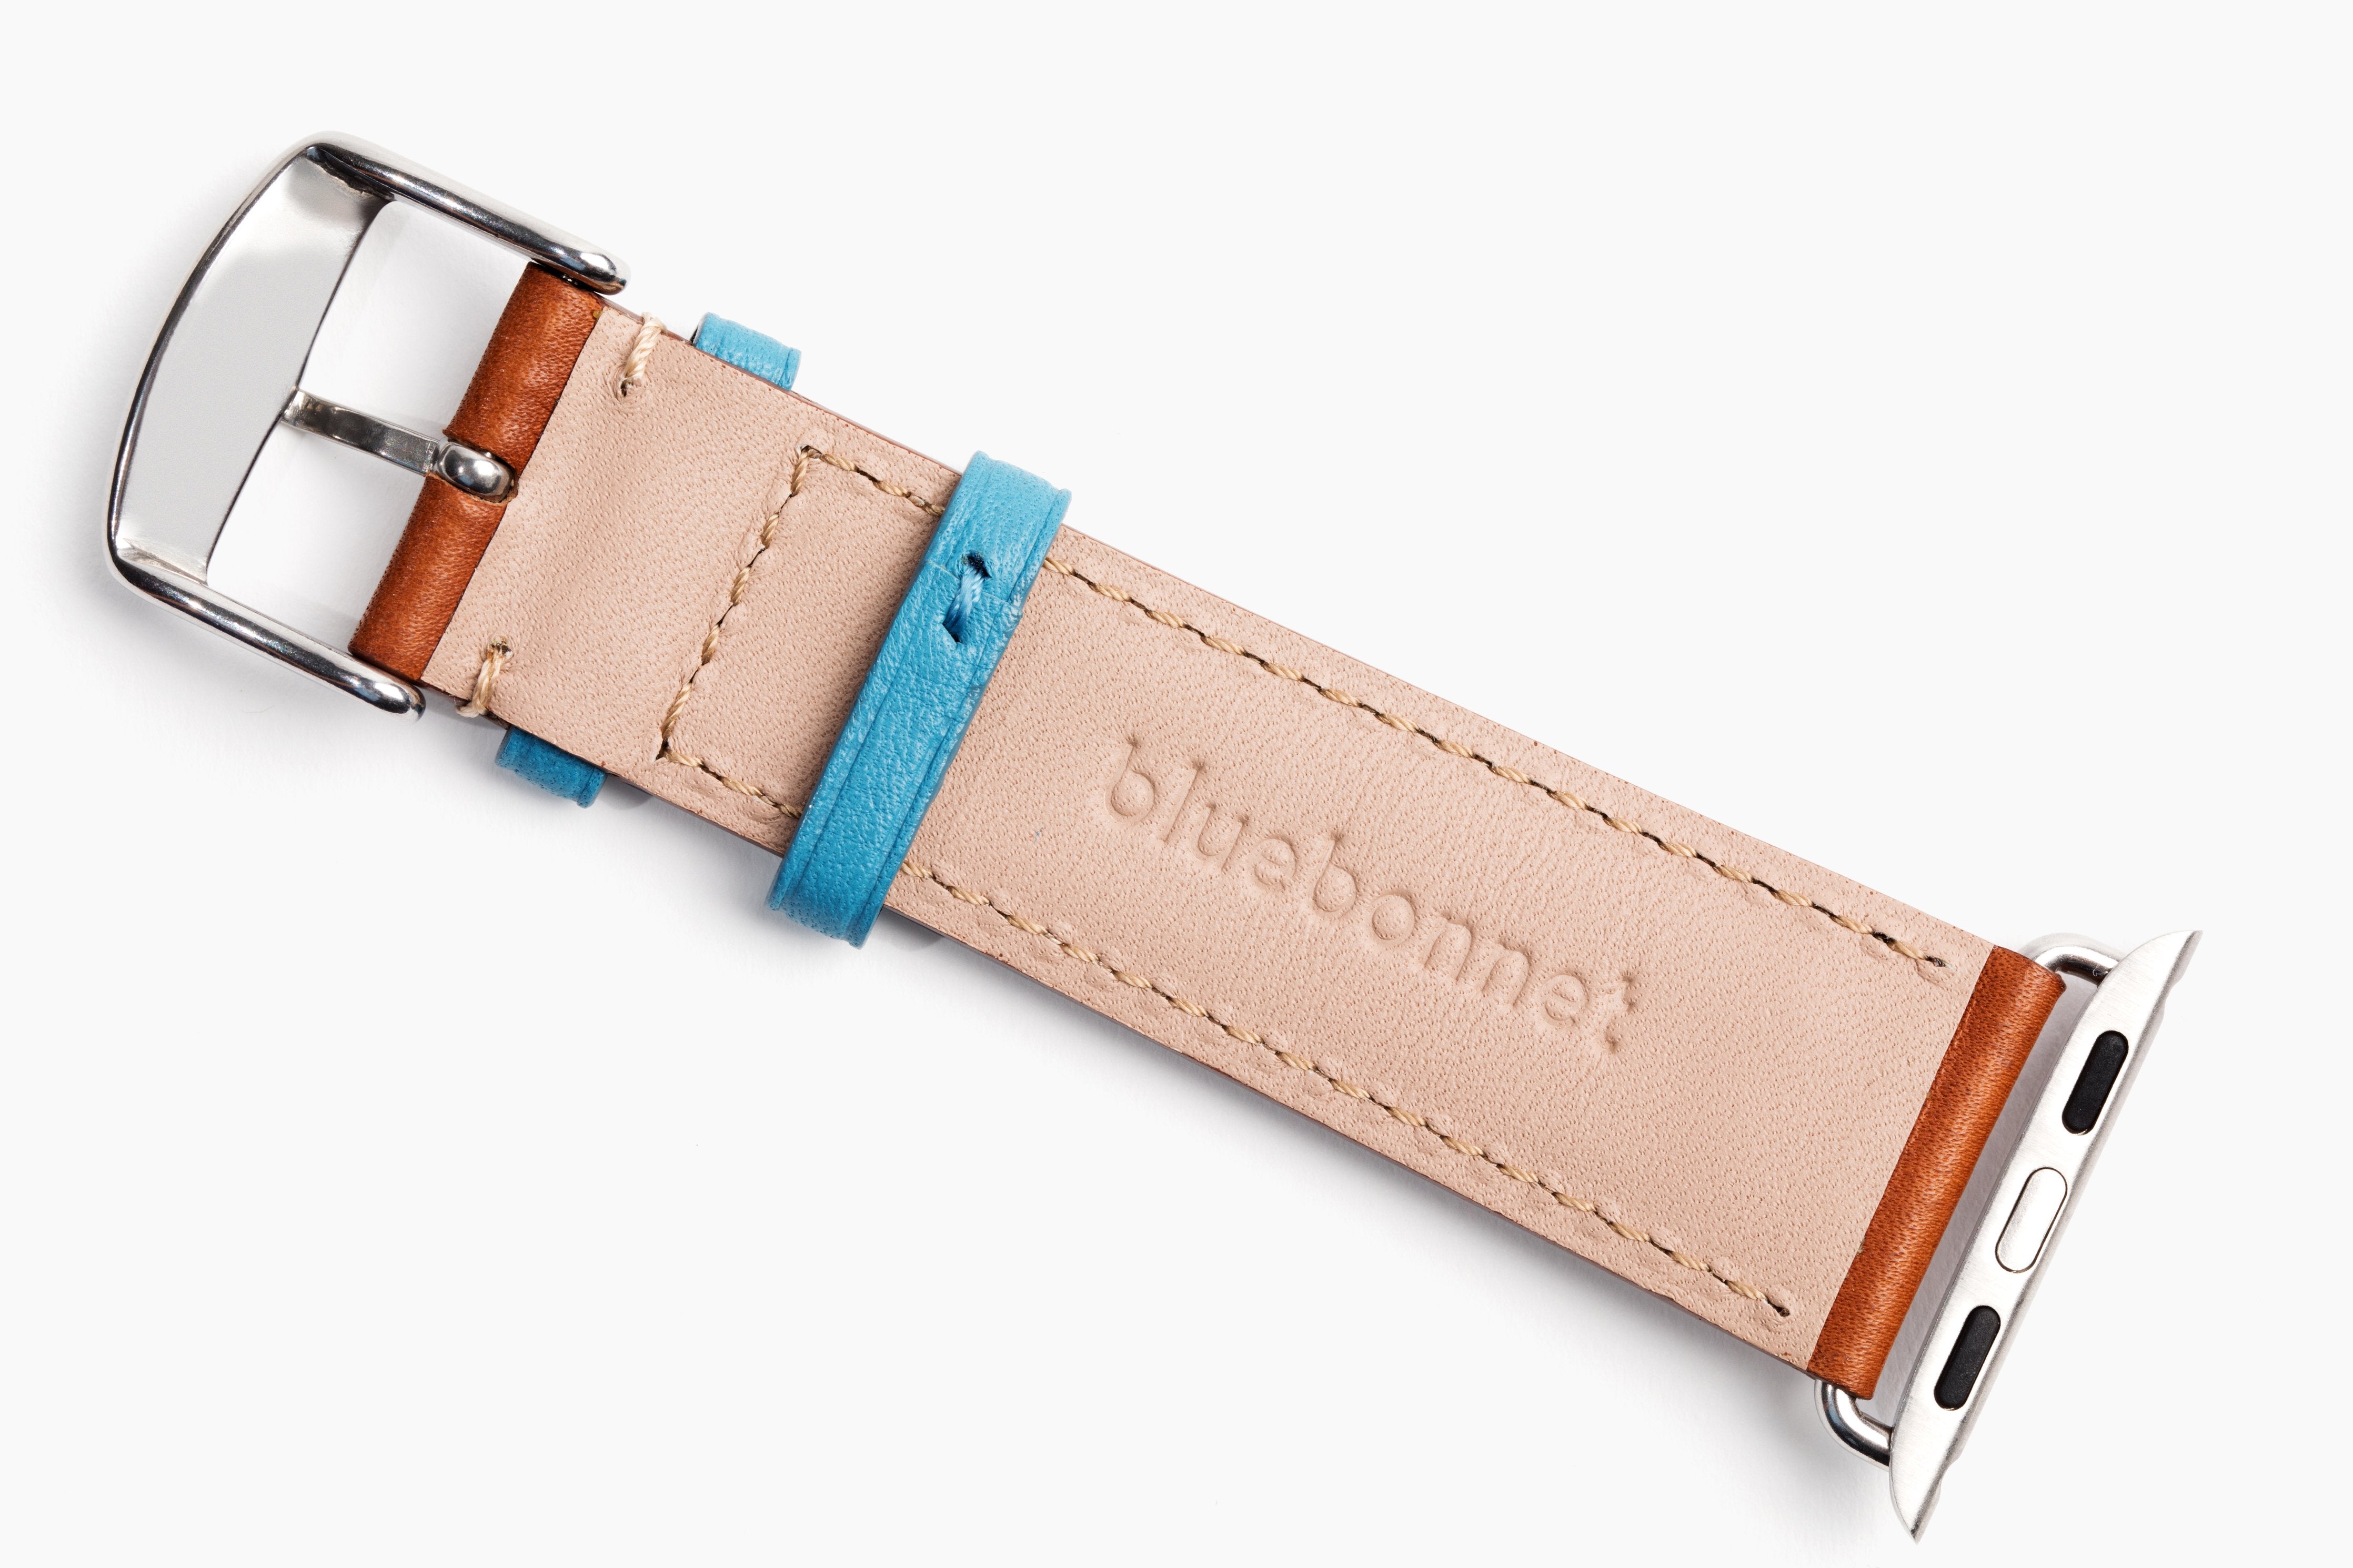 The Executive Premium French Leather Apple Watch Band - Tan | Bluebonnet Case